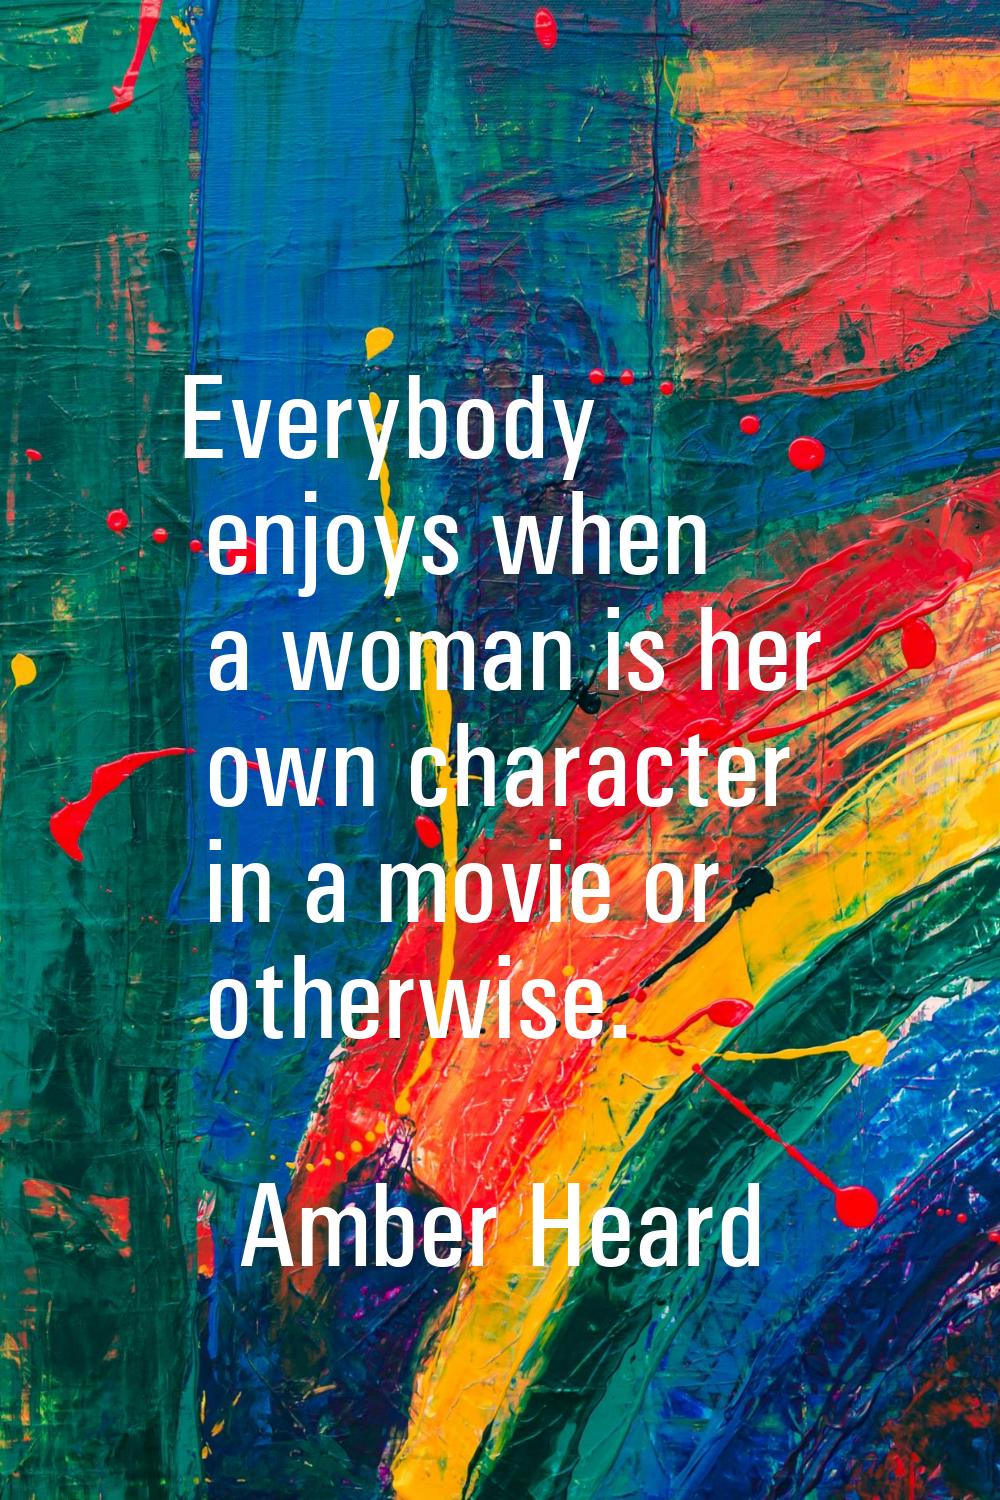 Everybody enjoys when a woman is her own character in a movie or otherwise.